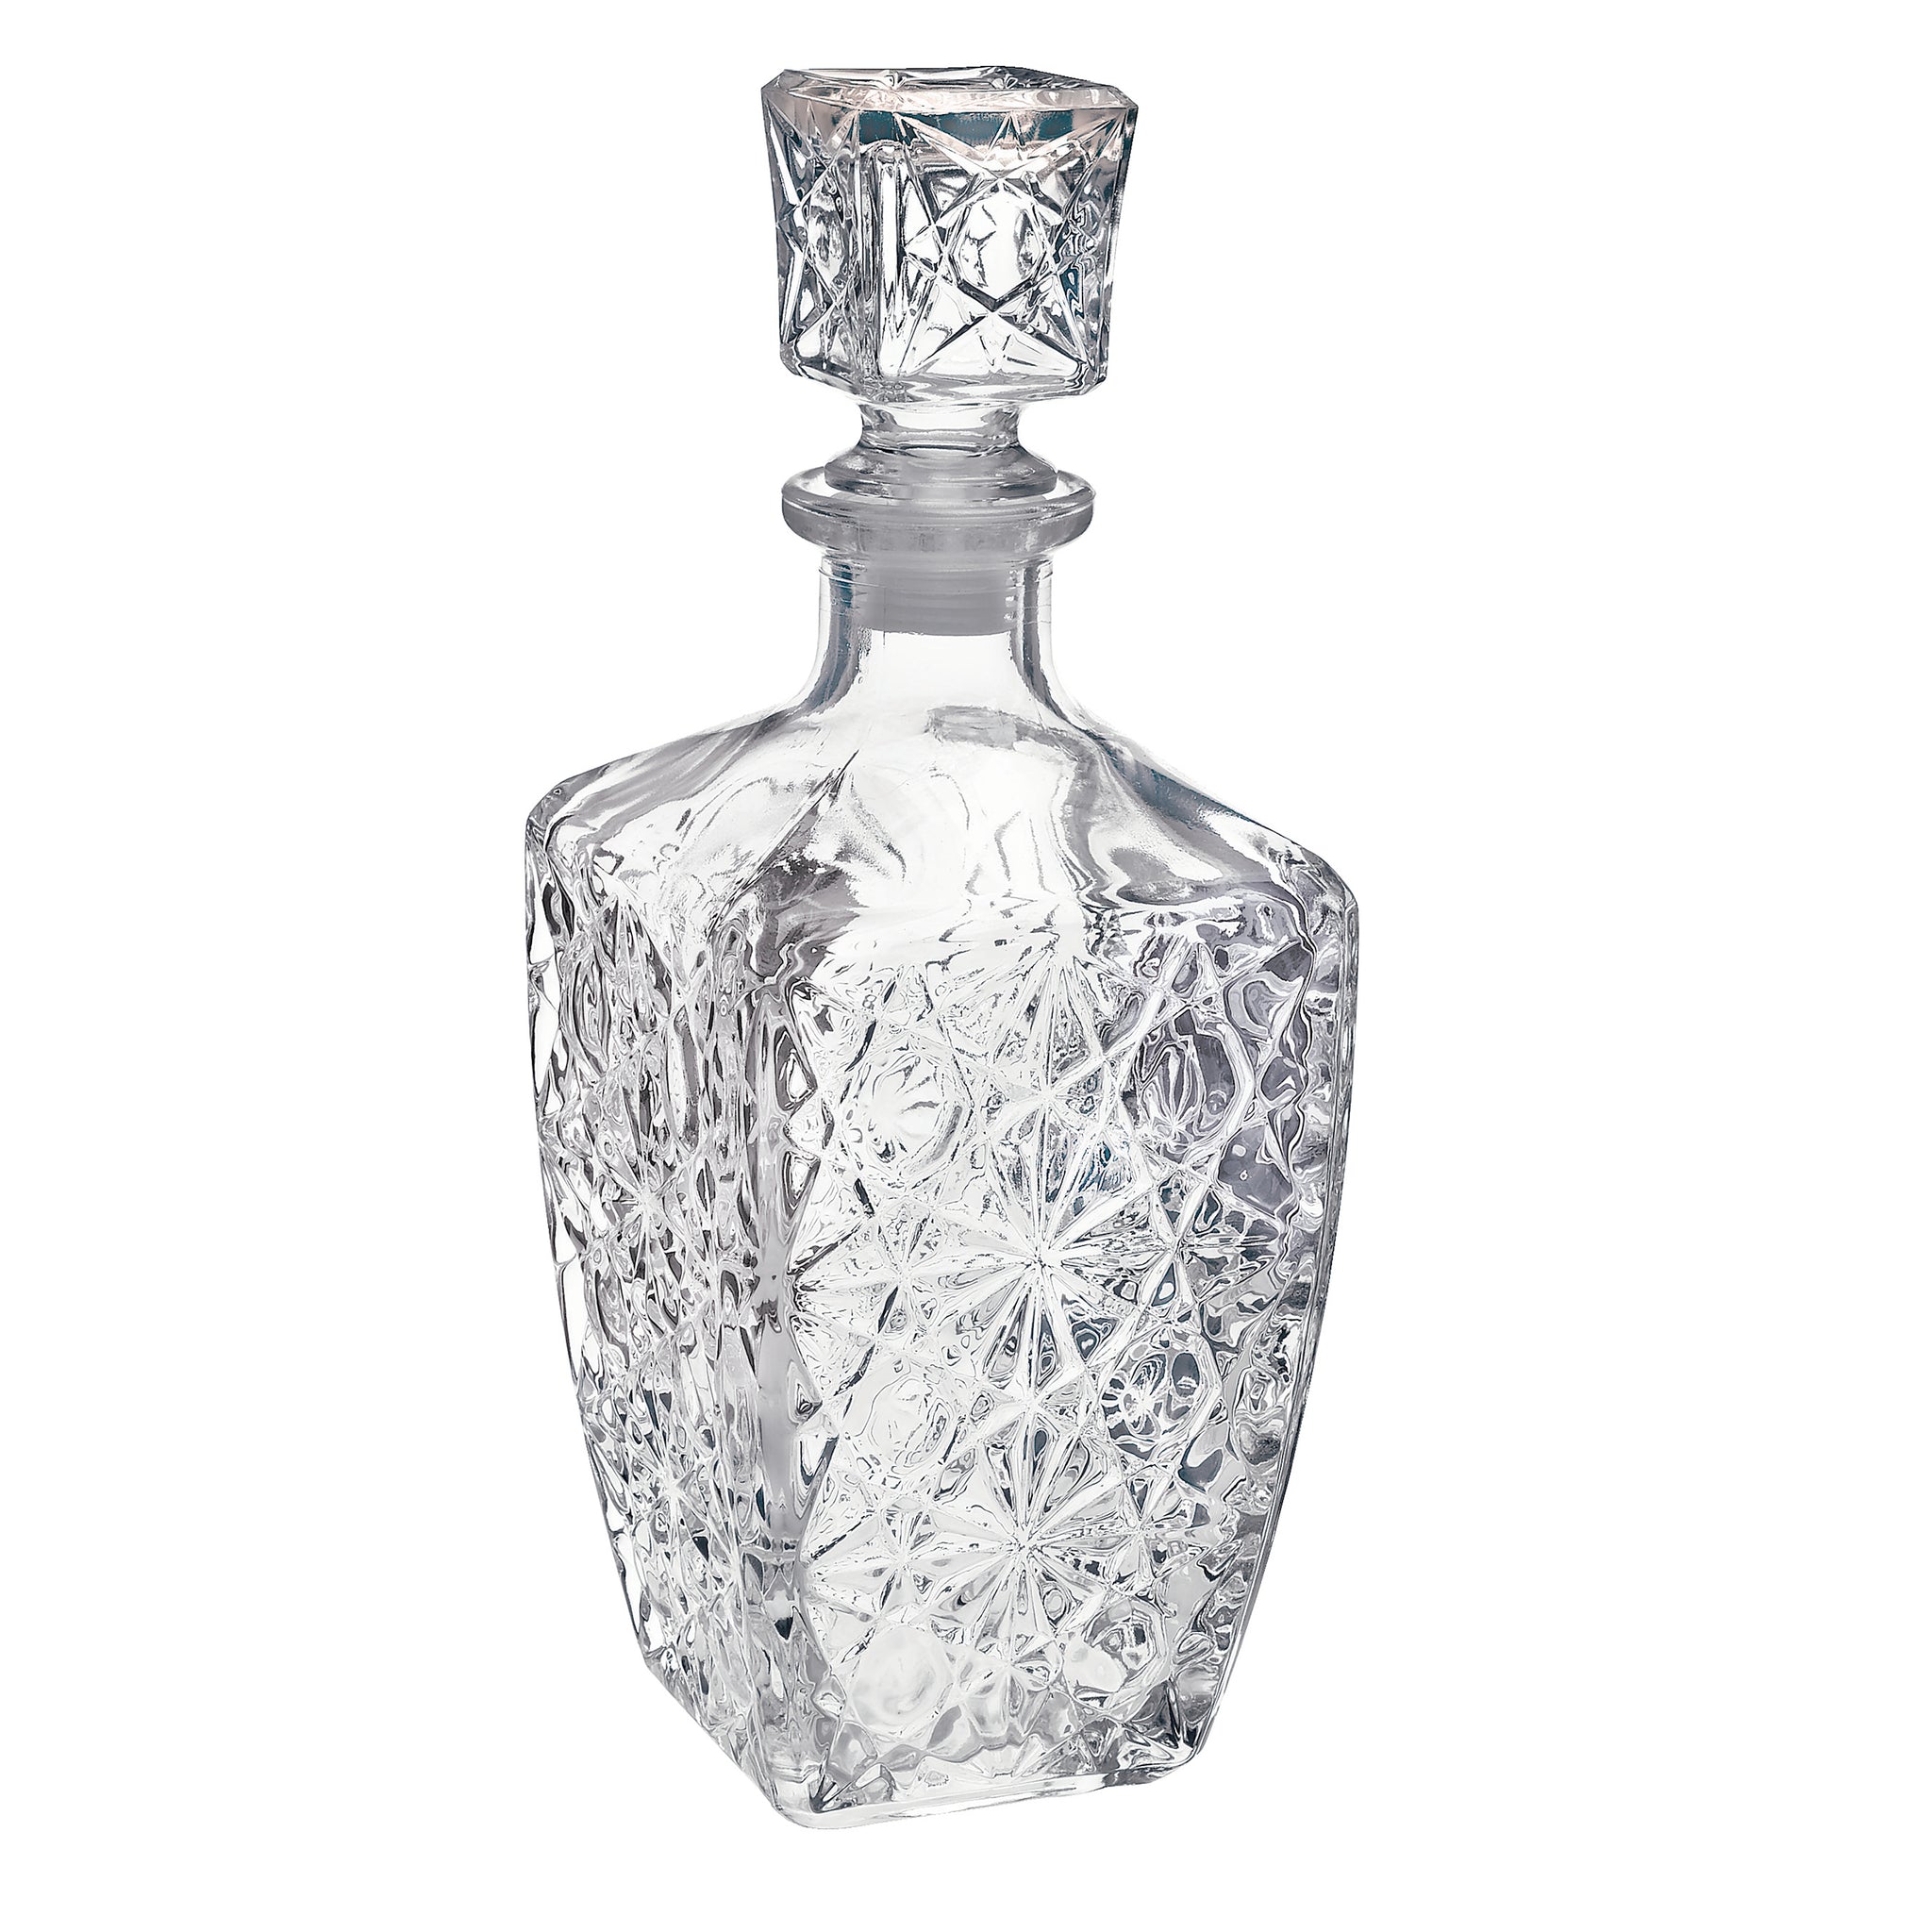 STUNNING Vintage Cut Crystal Brandy Decanter Bottle with Stopper